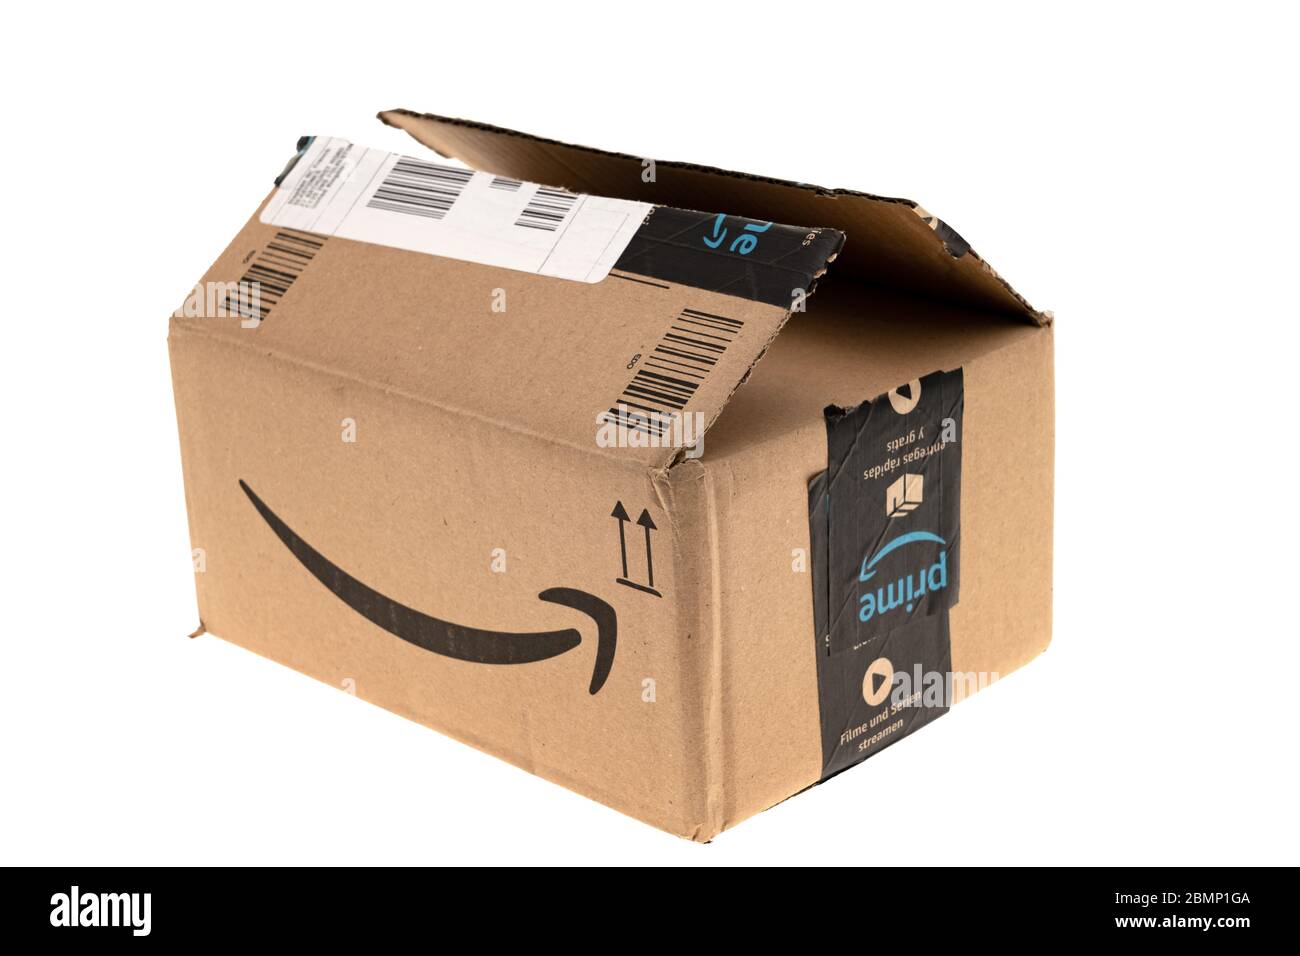 London, United Kingdom - April 10, 2020: Opened Amazon Prime shipping package or box on a white background. Amazon.com went online in 1995 and is now Stock Photo